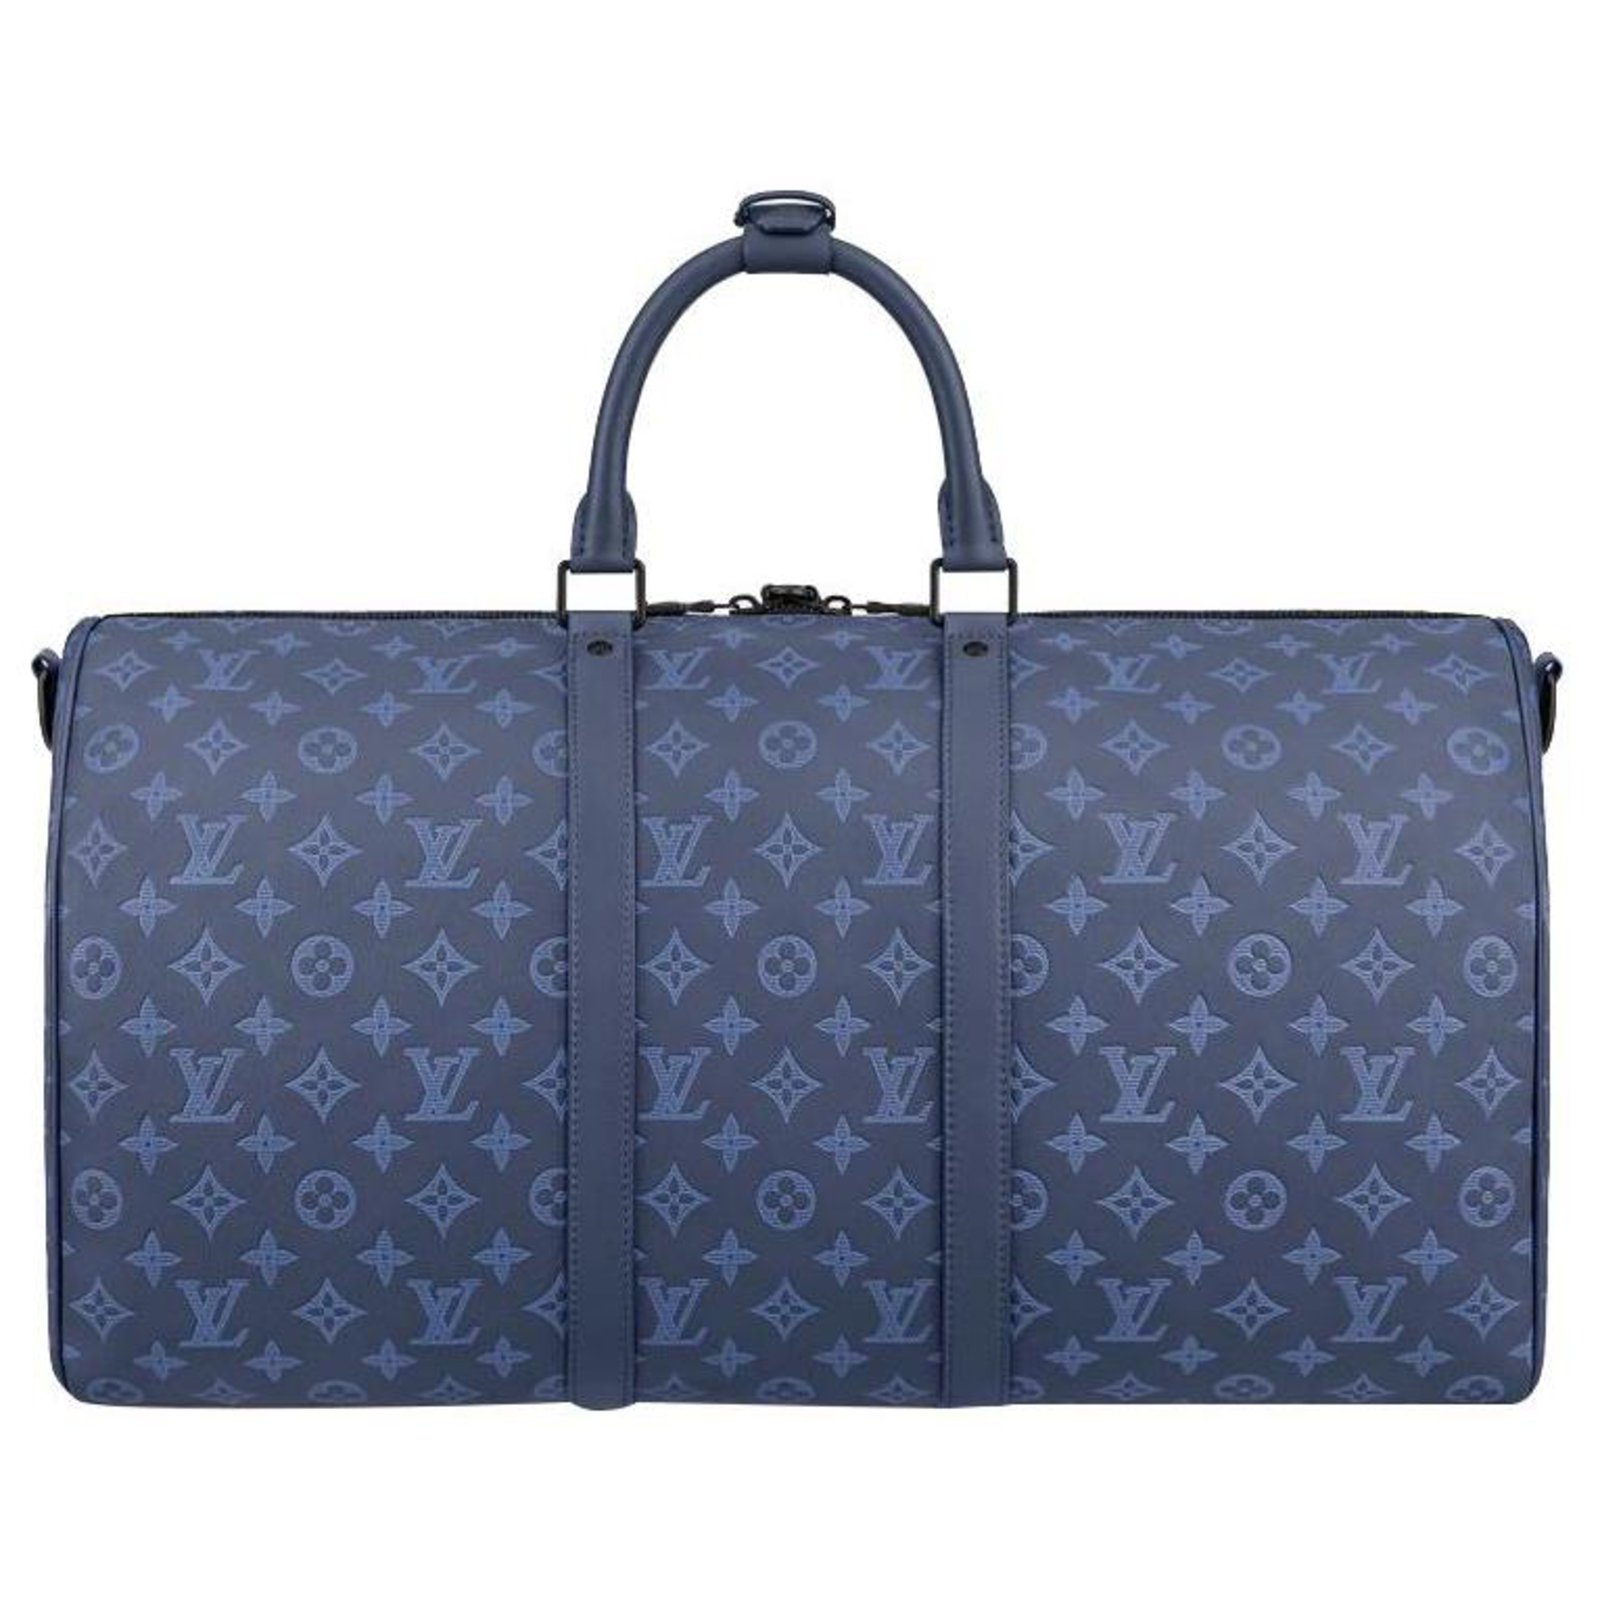 For Summer 2023, this sky blue version of the Keepall Bandoulière